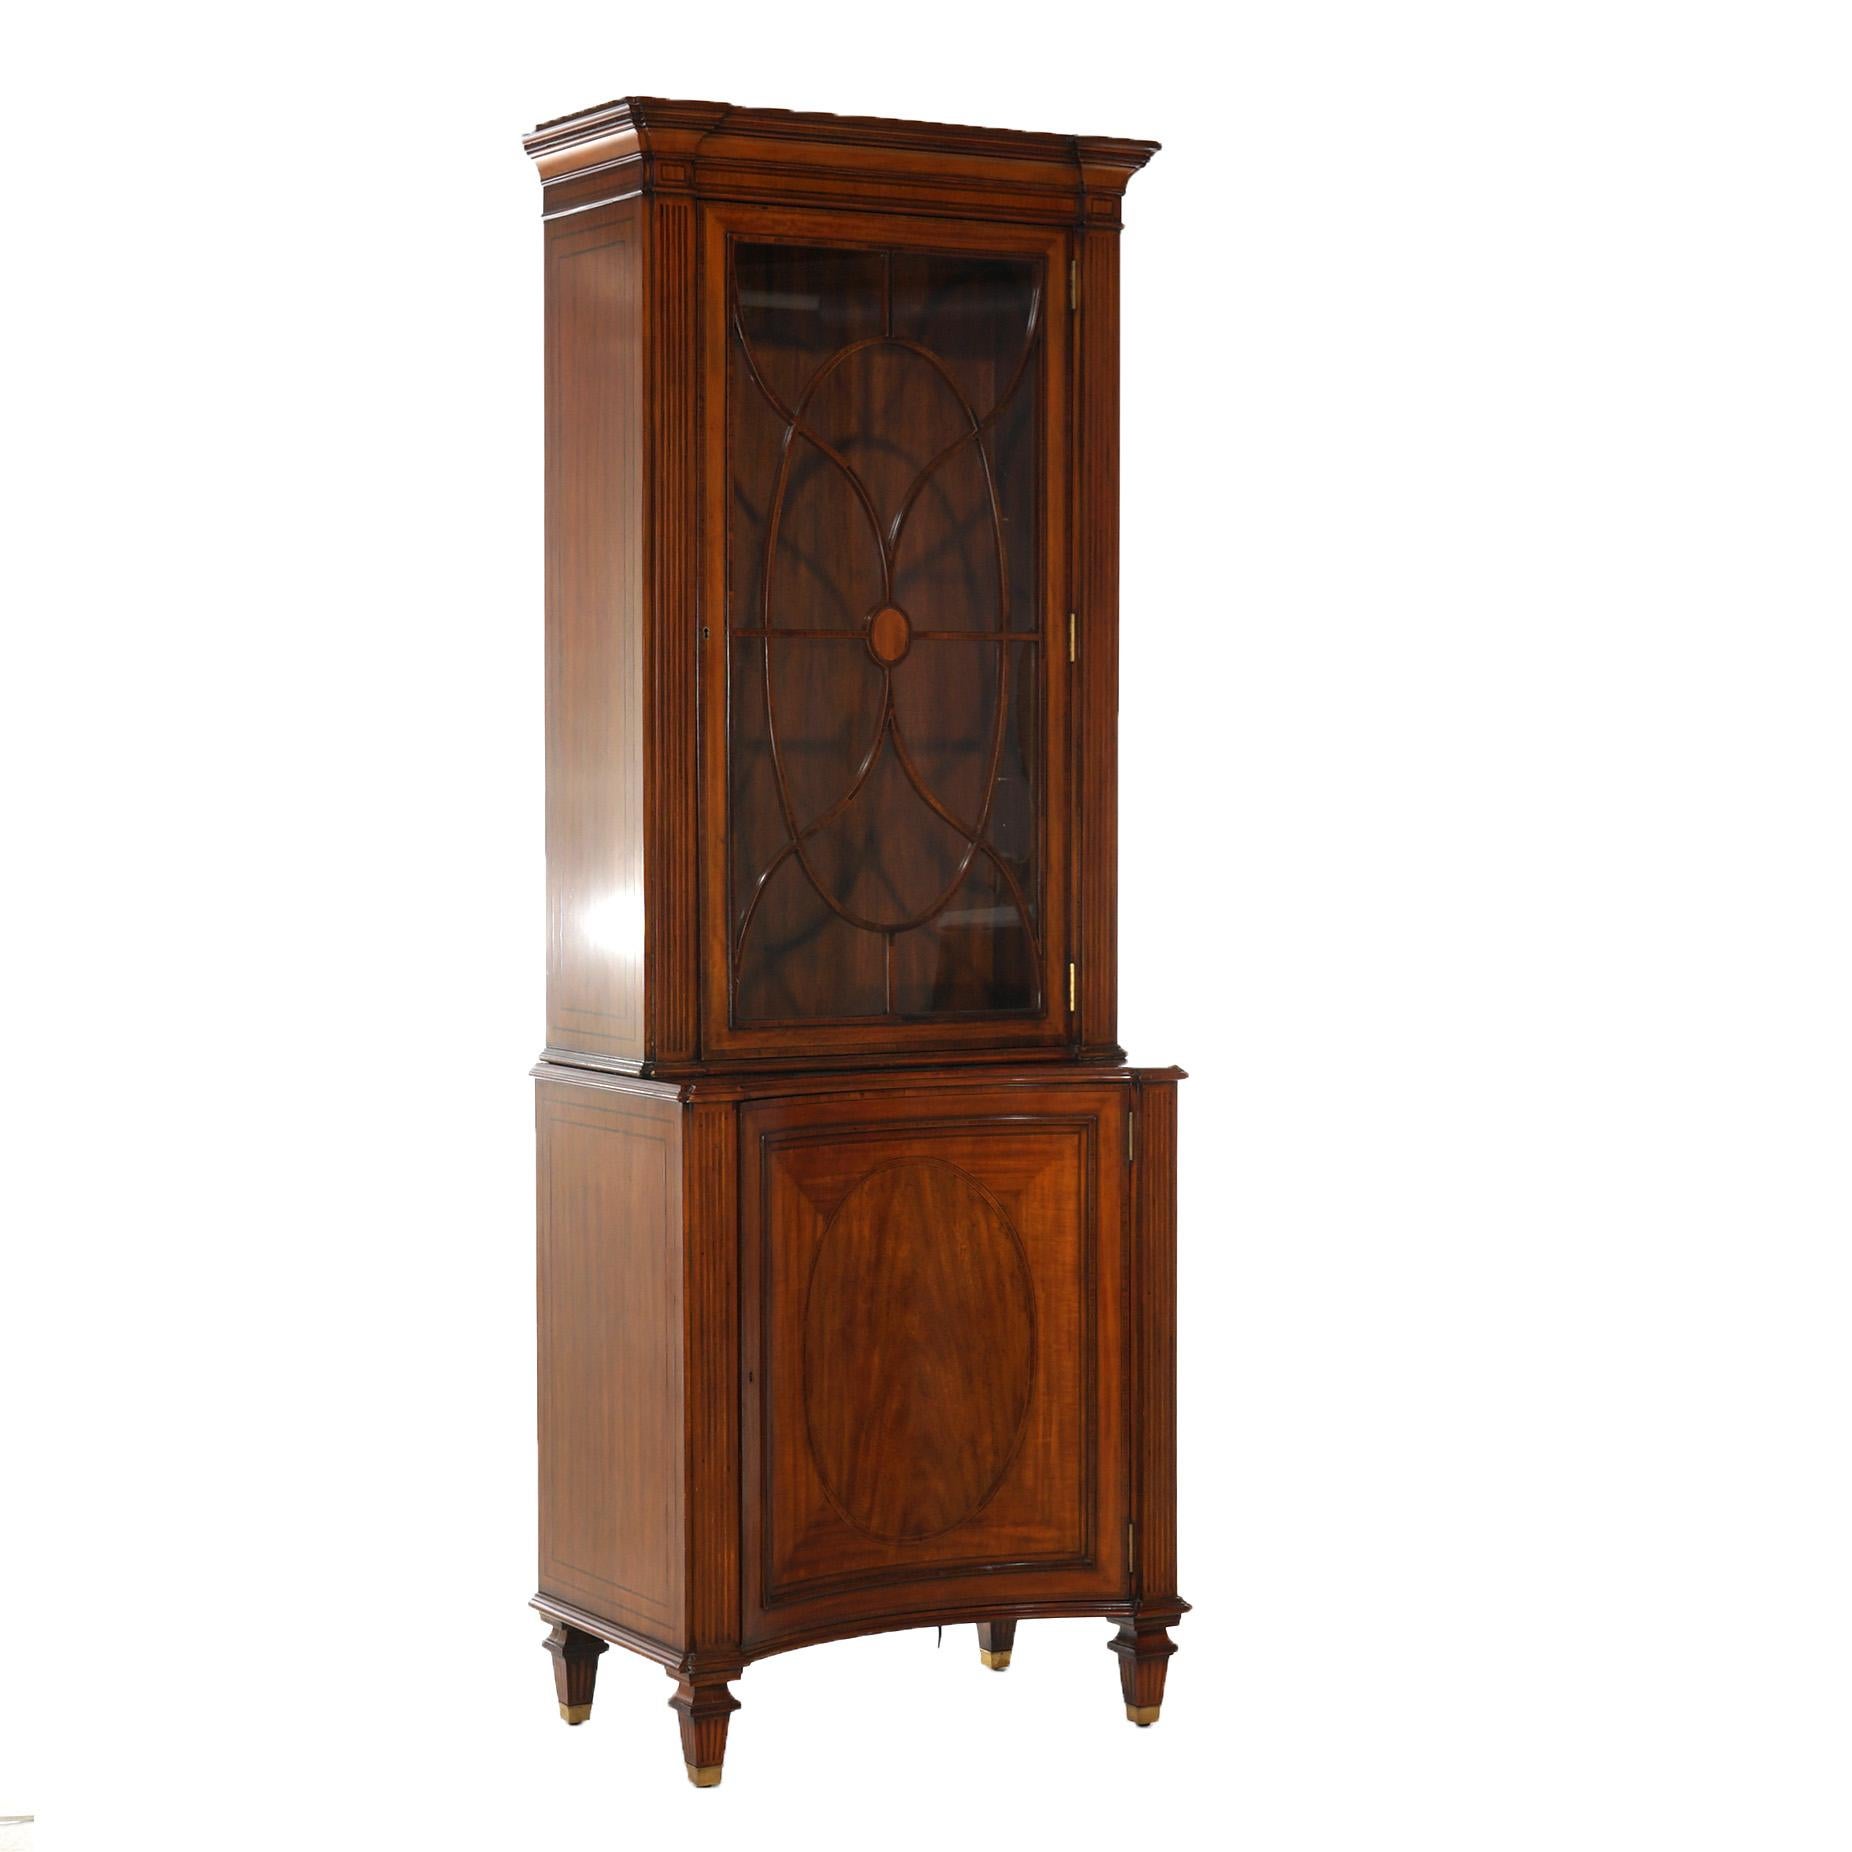 A bookcase by Maitland Smith offers mahogany construction with upper having single glass door opening to shelved interior over lower blind concave door cabinet with inlaid and banded decoration, maker label as photographed, 20th century

Measures-